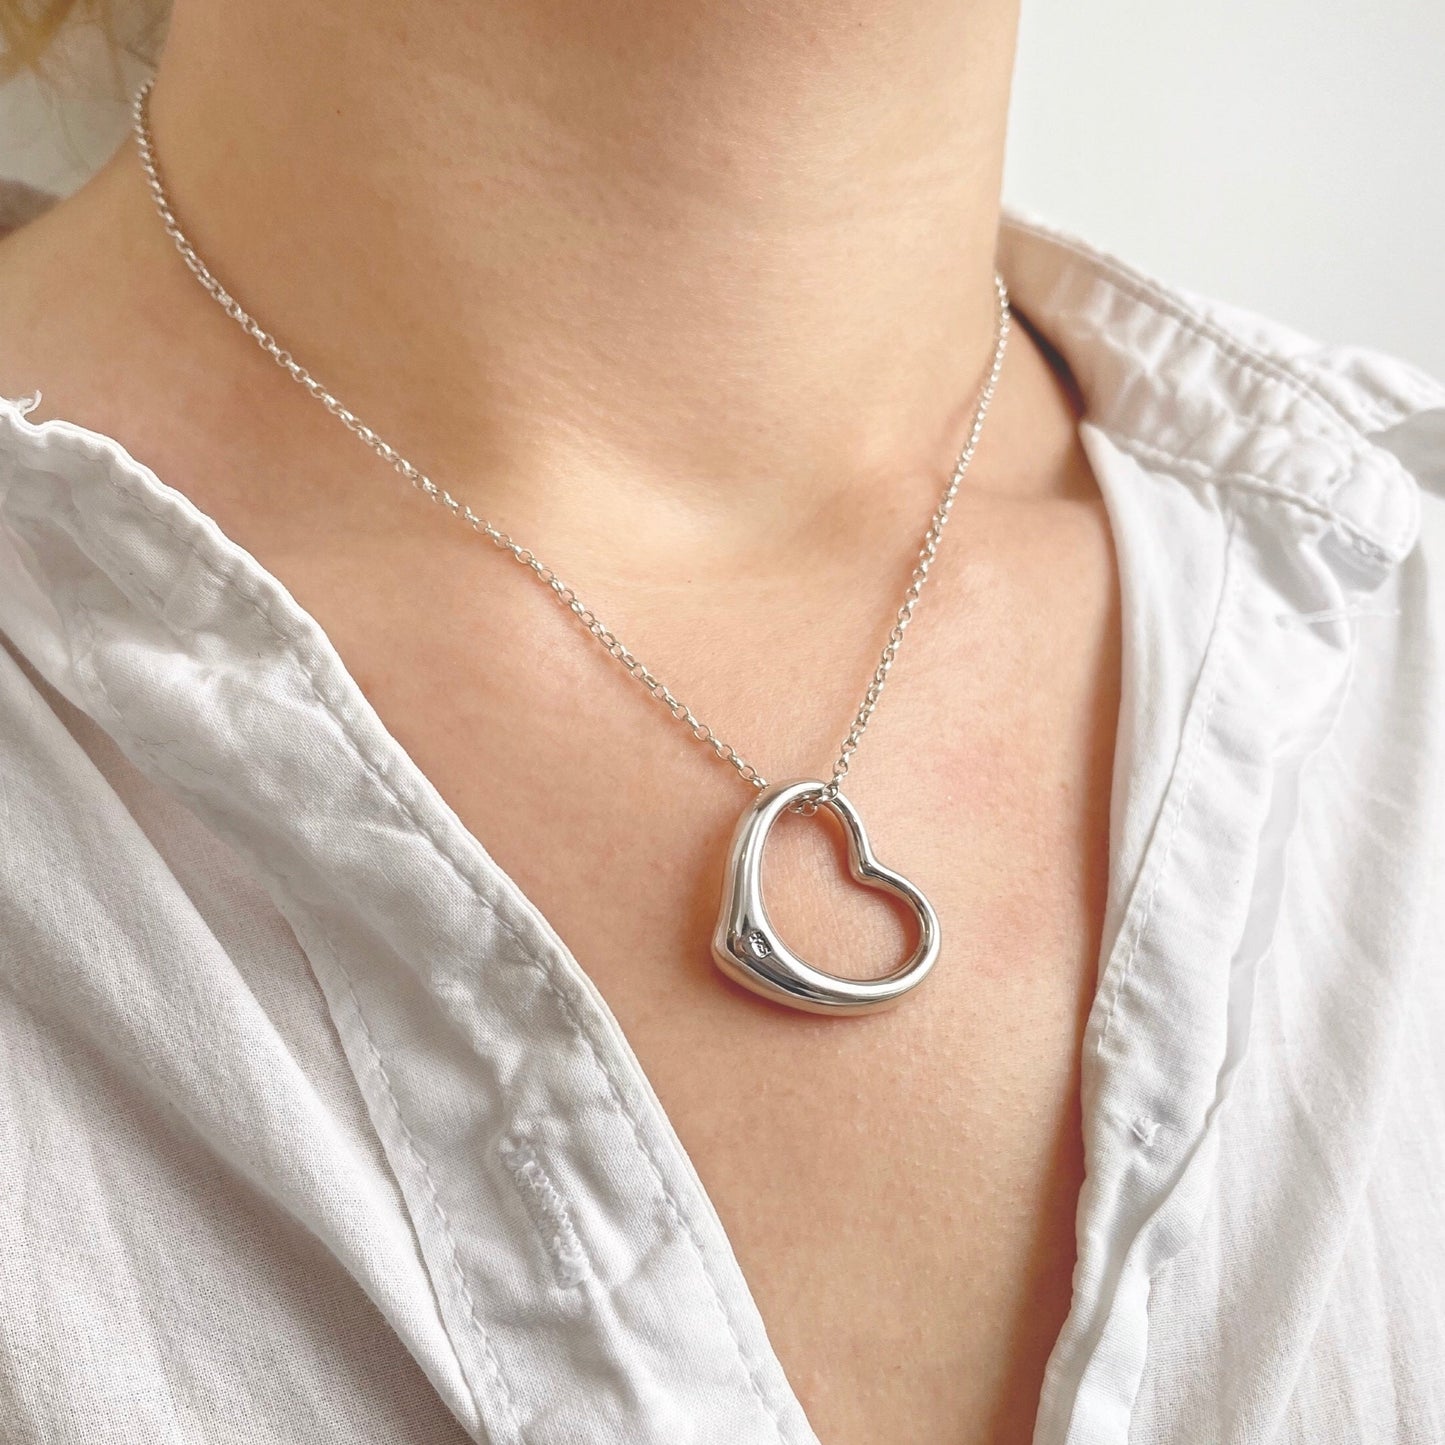 Large Open Heart Solid Silver Pendant